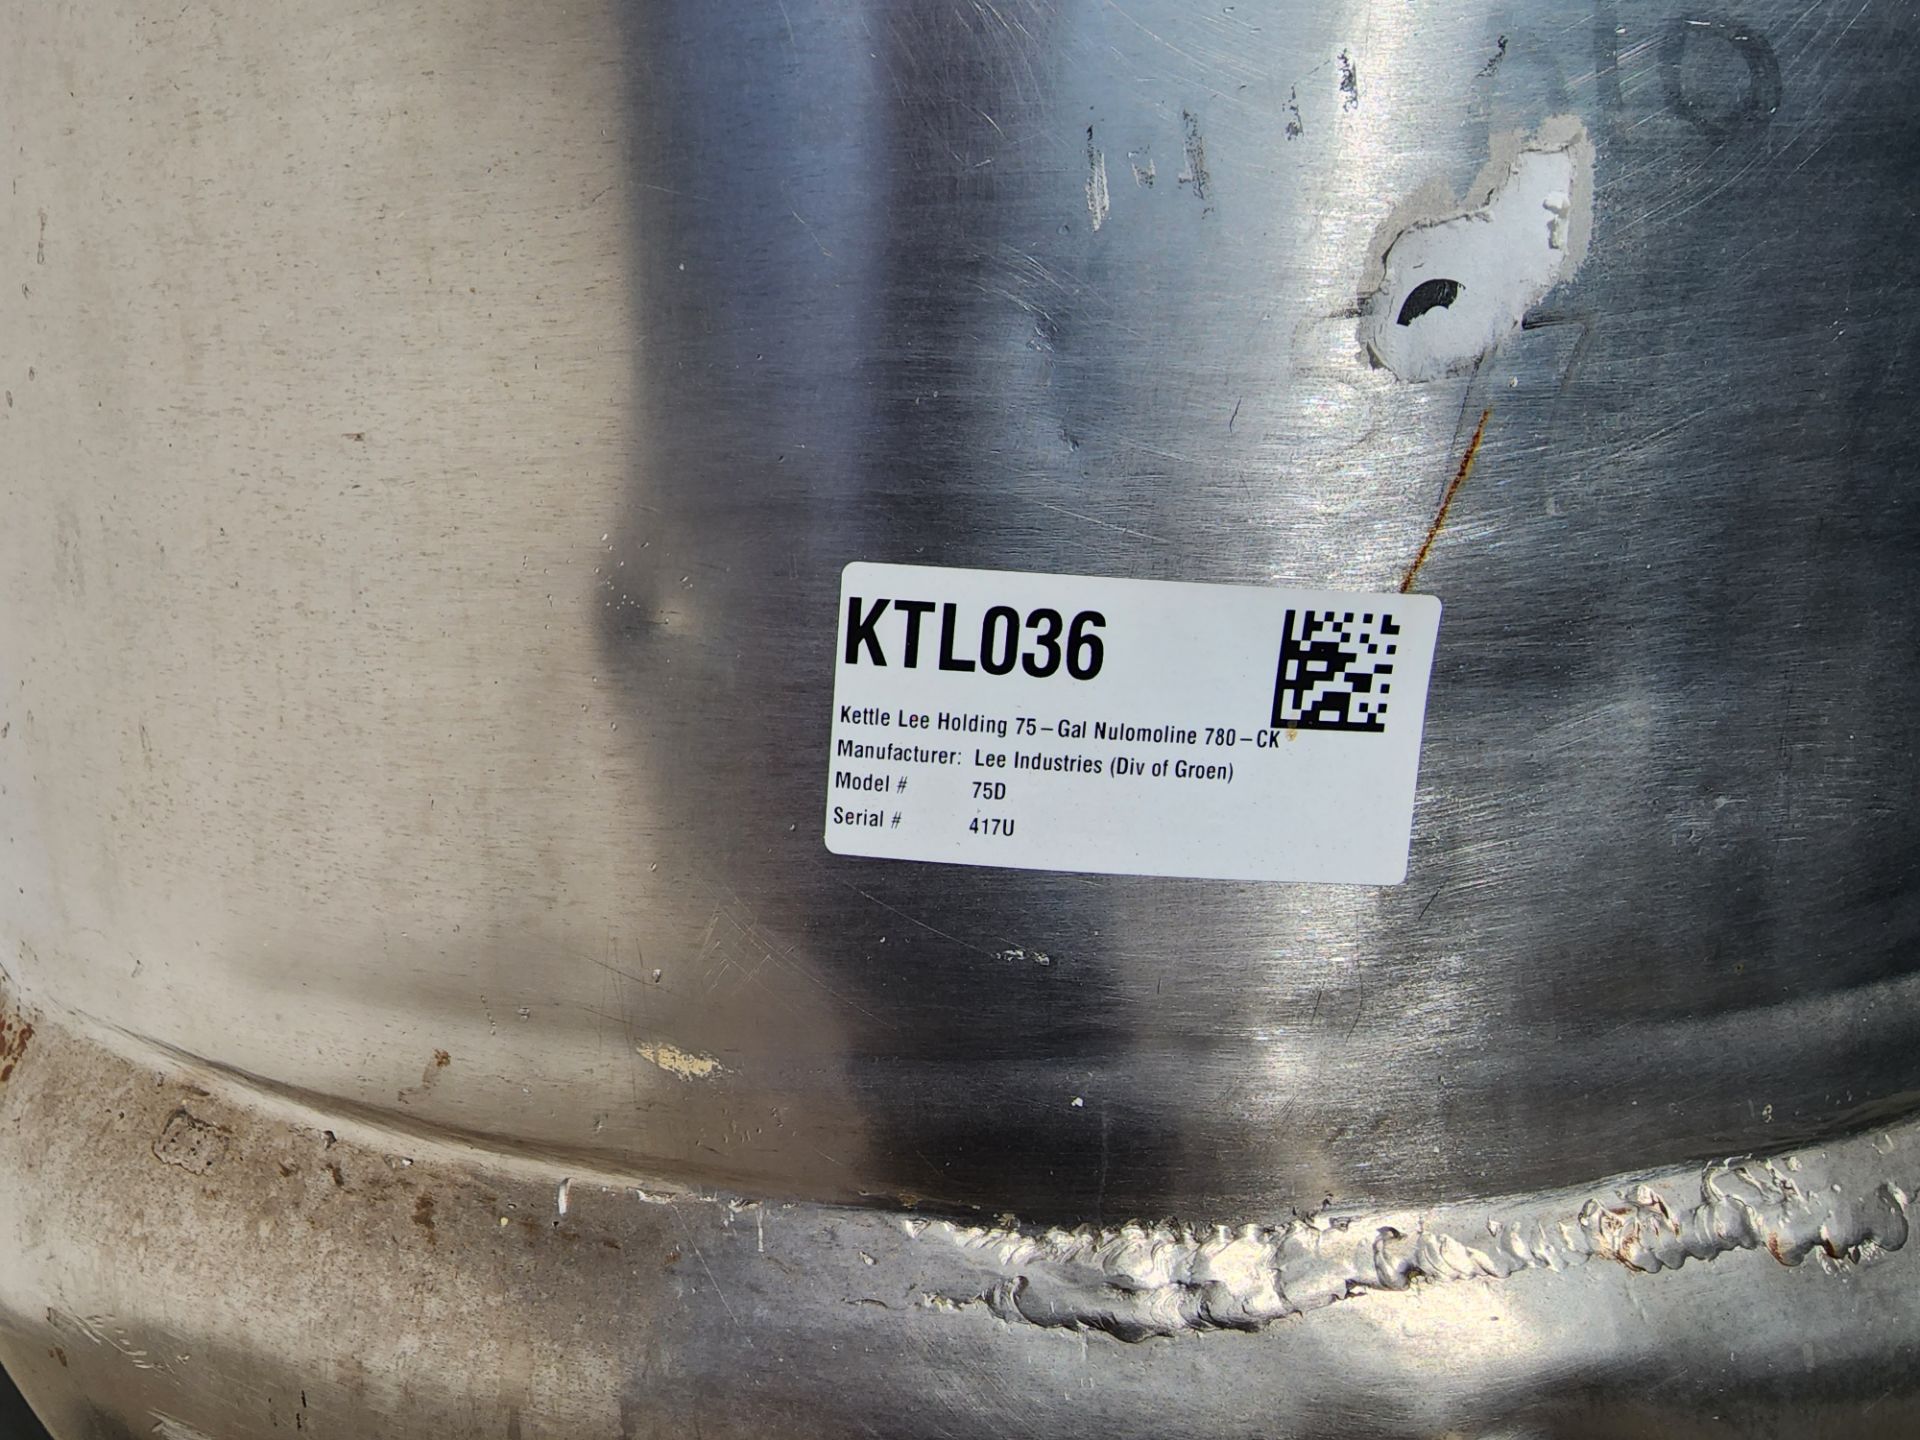 Lee Steam Fired Jacketed Kettle, Model 75D, SN 417 U, 75 Gallon Capacity. - Image 6 of 8